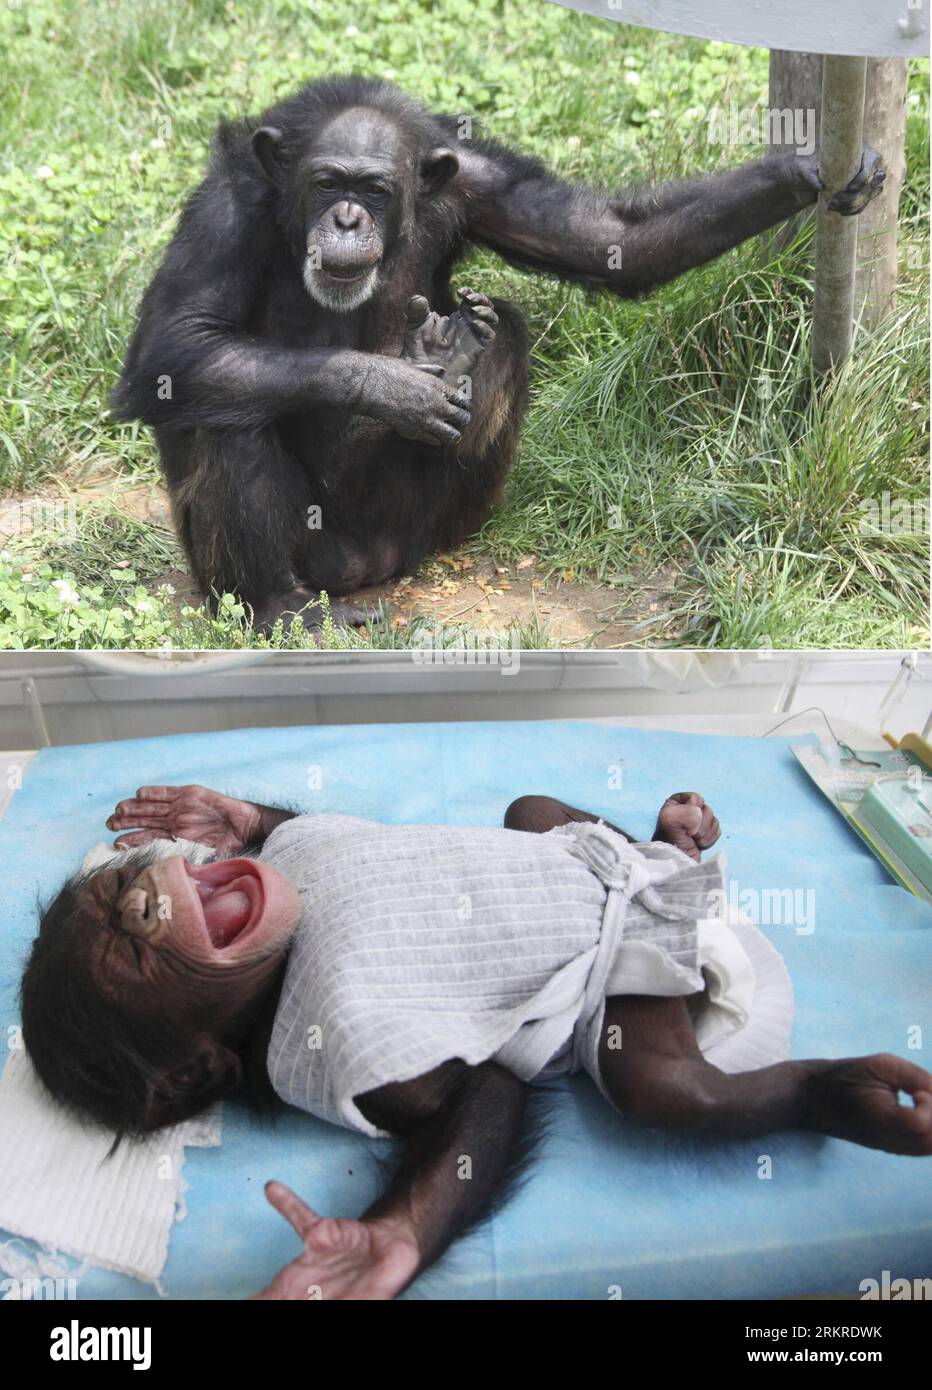 Bildnummer: 58207739  Datum: 08.07.2012  Copyright: imago/Xinhua (120708) -- WEIHAI, July 8, 2012 (Xinhua) -- A combined photo taken on July 8, 2012 shows a baby chimpanzee and her mother (top) at a wildlife park in Weihai, east China s Shandong Province. A 40-year-old chimpanzee gave birth to a female baby here on Saturday. (Xinhua/Yu Qibo) (ljh) CHINA-SHANDONG-WEIHAI-CHIMPANZEE (CN) PUBLICATIONxNOTxINxCHN Tiere Affen Schimpansen Baby Junges Jungtier Affenbaby xrj x0x 2012 hoch      58207739 Date 08 07 2012 Copyright Imago XINHUA  Weihai July 8 2012 XINHUA a Combined Photo Taken ON July 8 201 Stock Photo